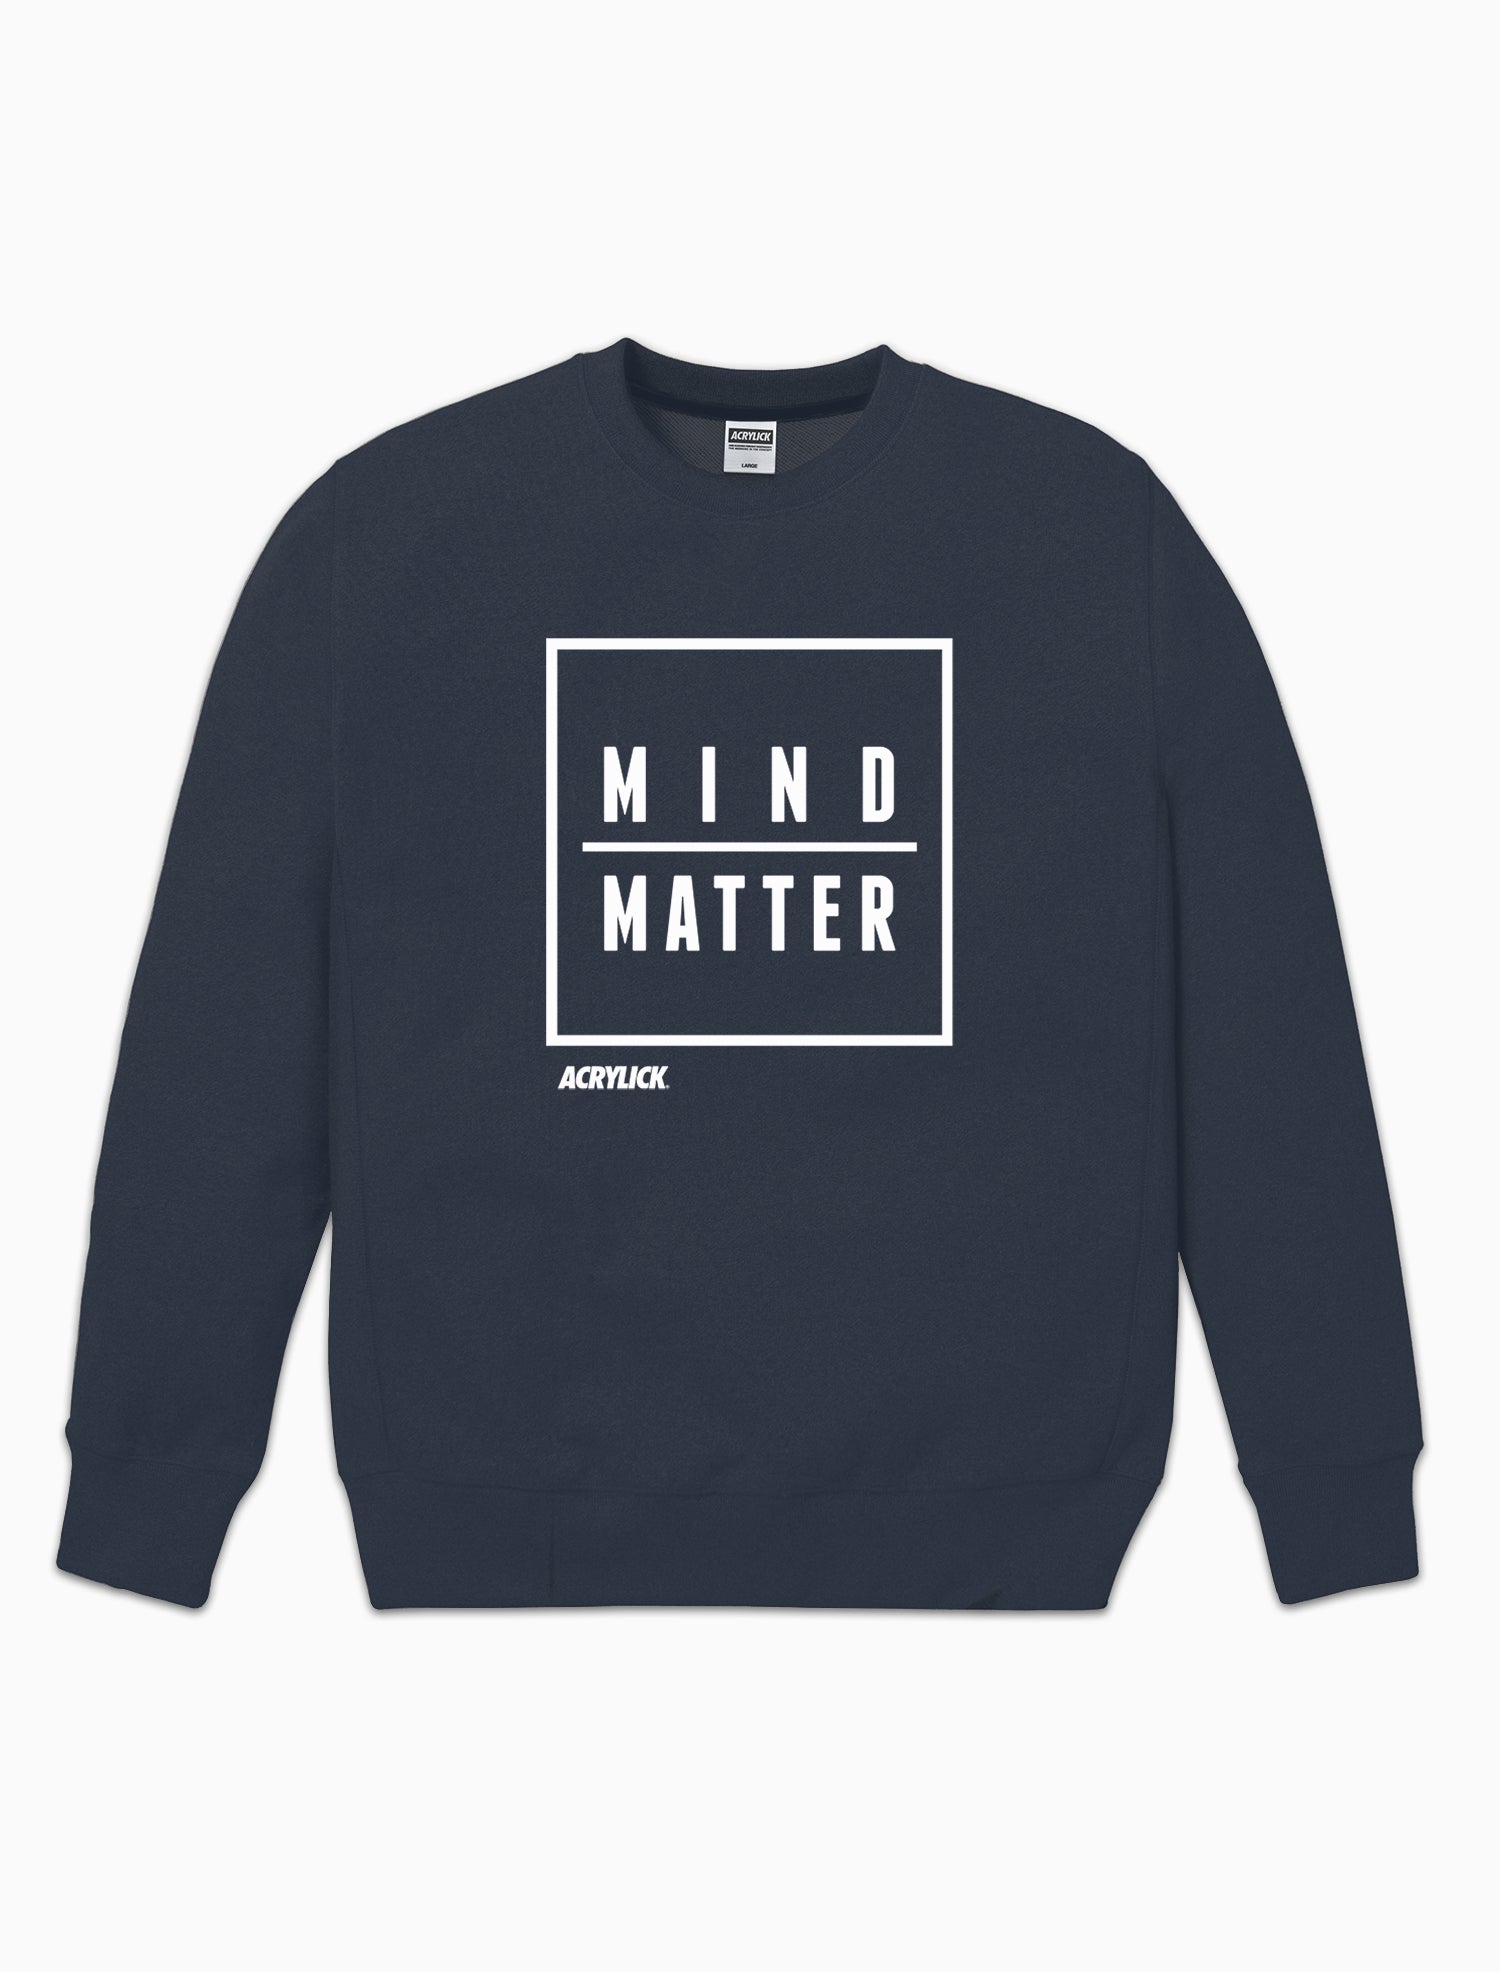 Acrylick Goods - Mind Over Matter Crewneck Available in Black and Navy